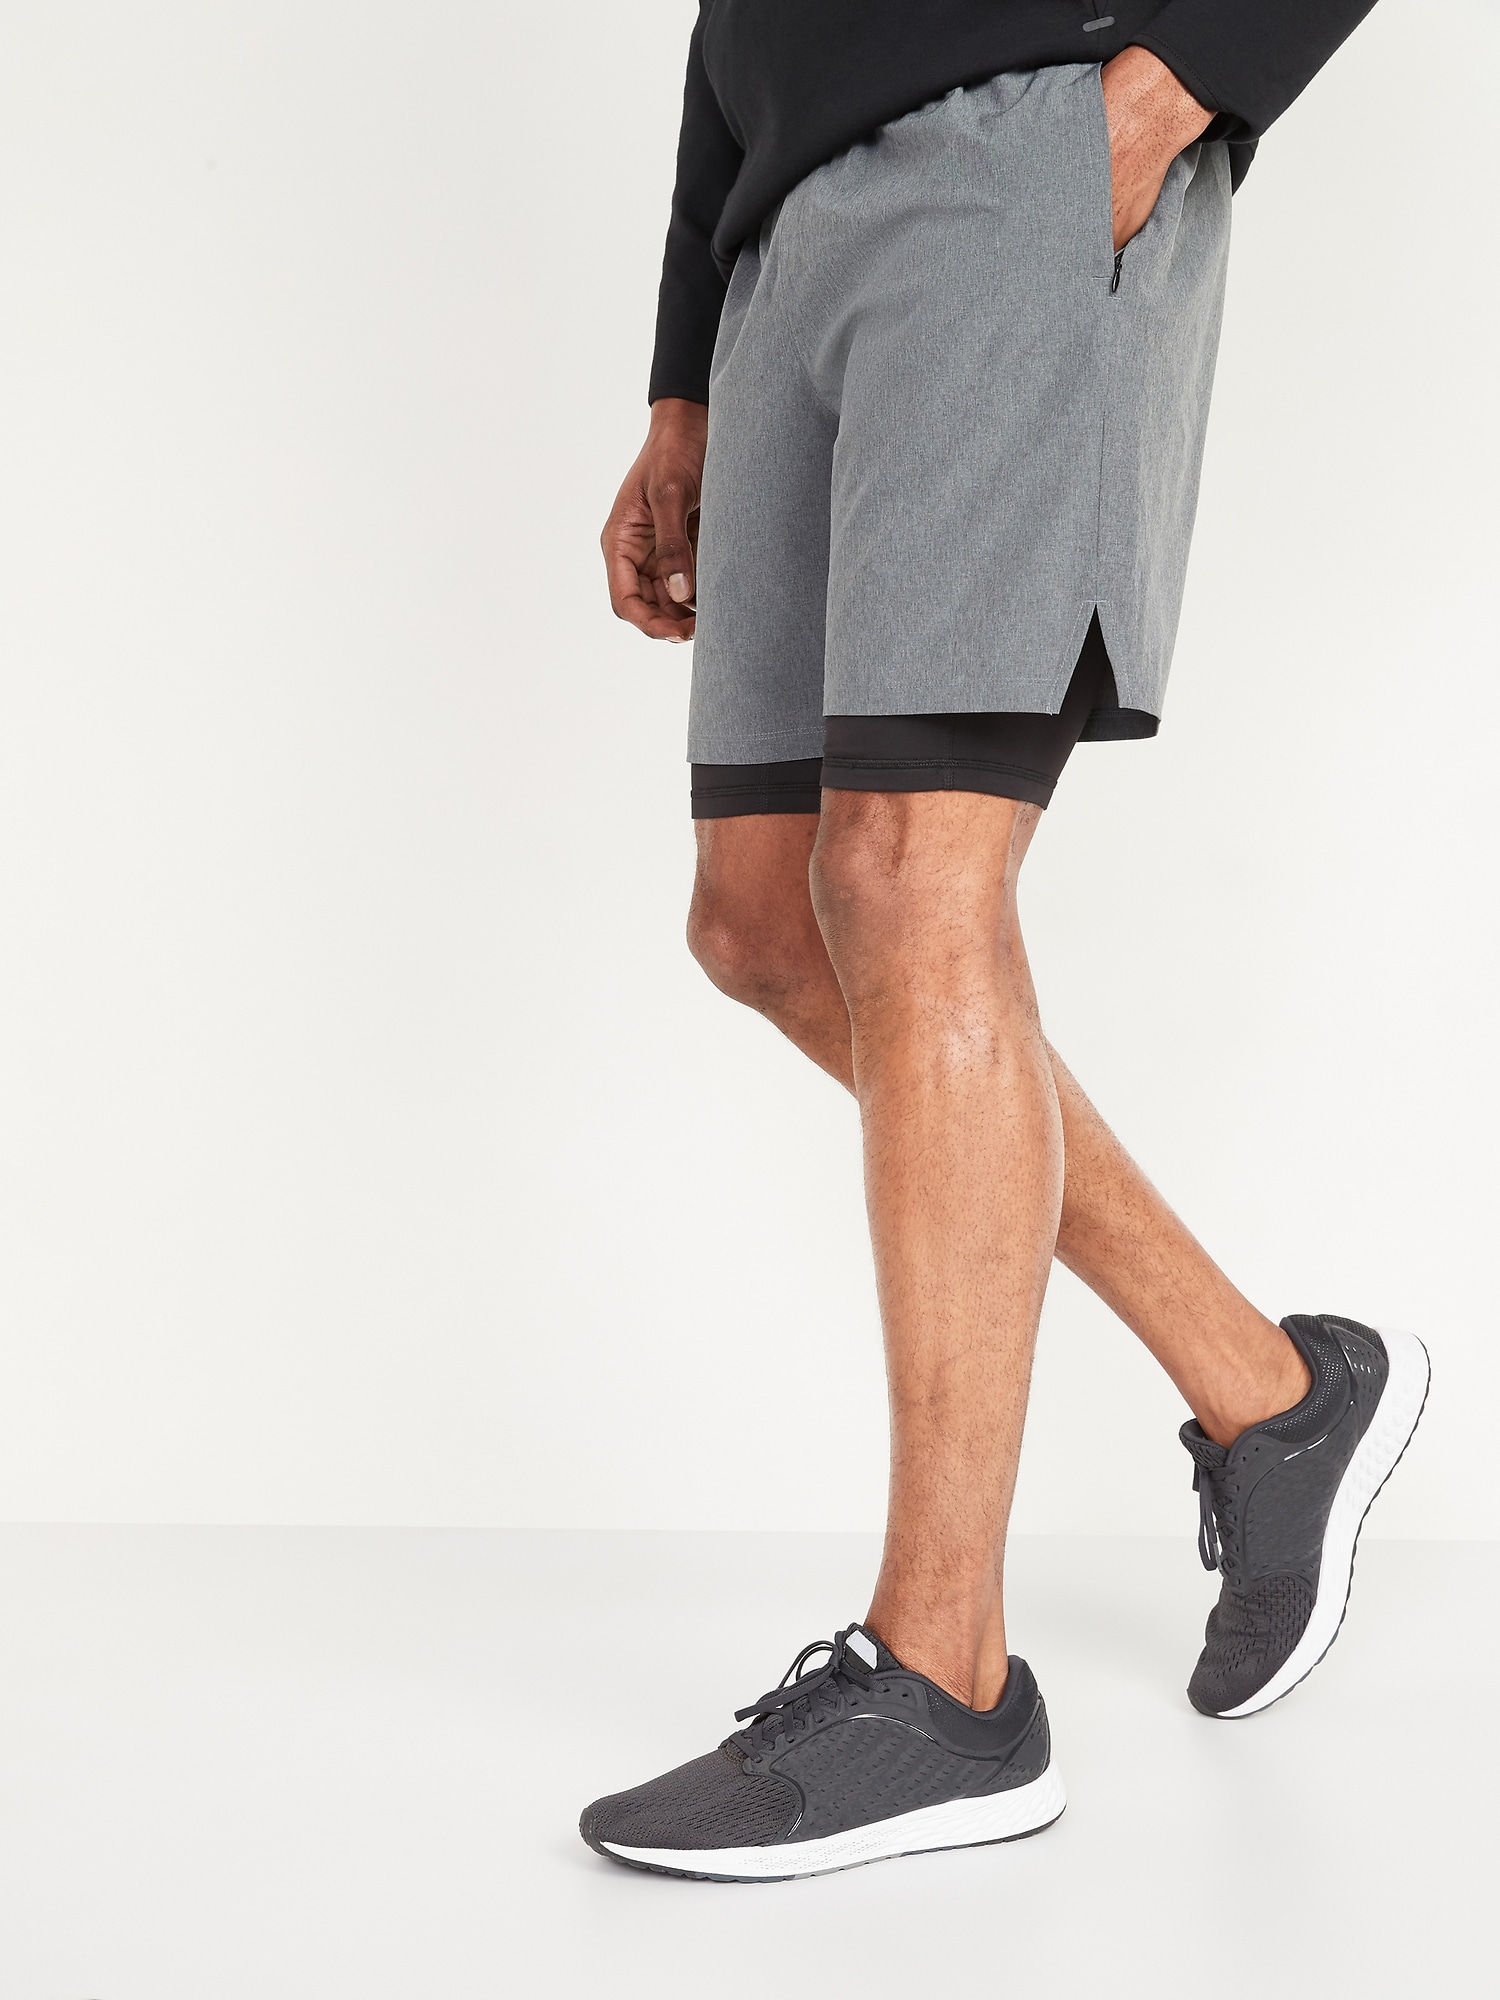 Old Navy Go 2-in-1 Workout Shorts + Base Layer for Men -- 9-inch inseam